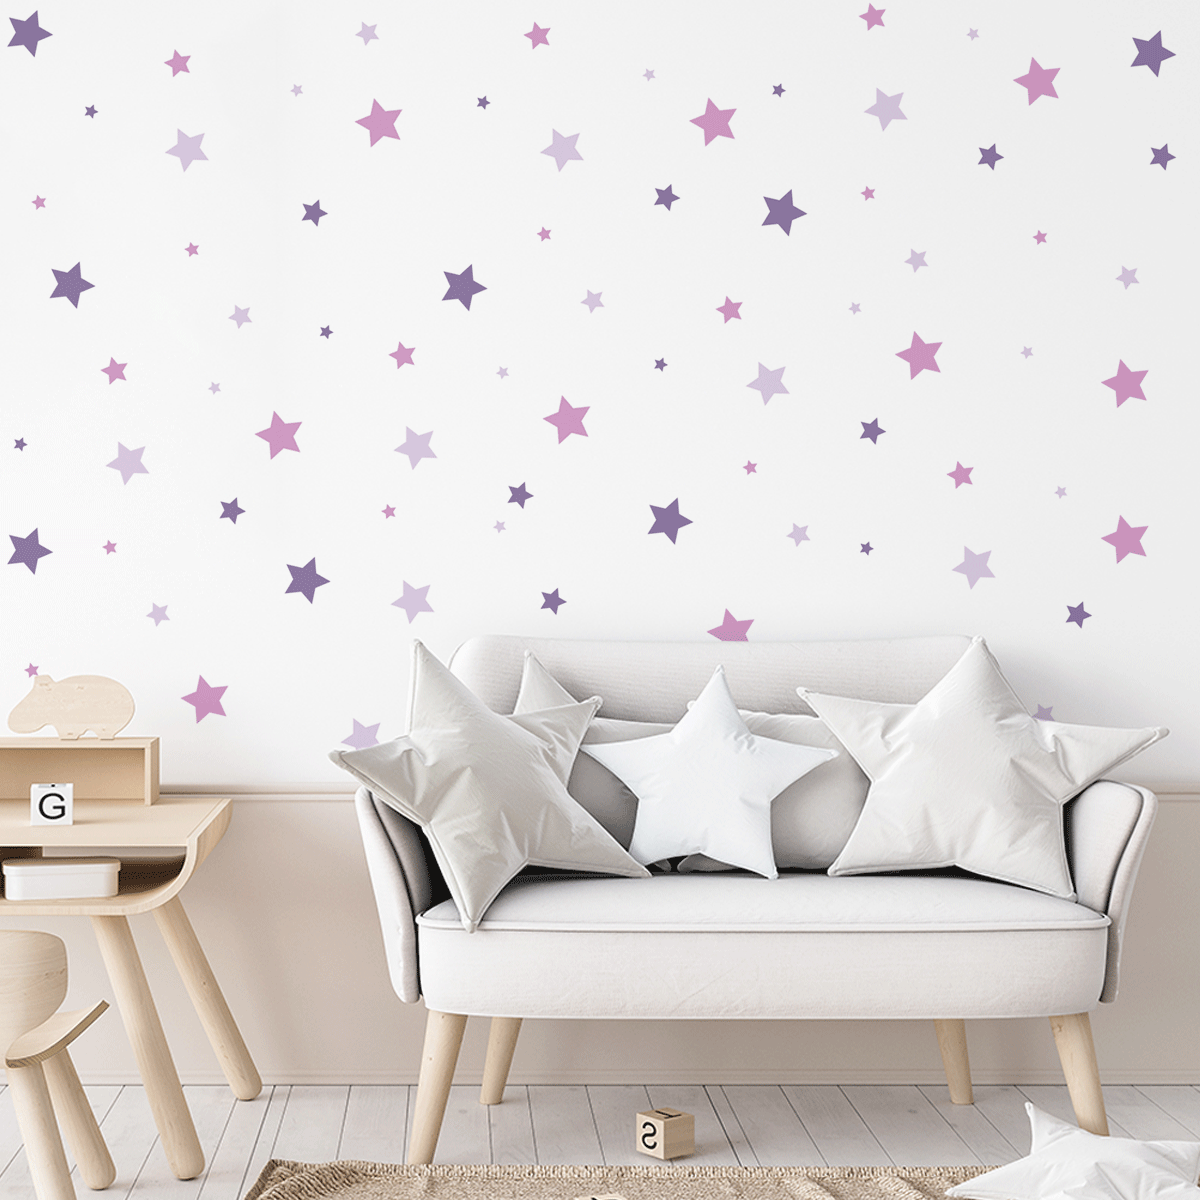 wall decal, purple and pink stars wall stickers, wall stickers with stars, wall decal with stars, wall sticker with stars, nursery pattern sticker, wall sticker, boys wall sticker, wall tattoo, nursery wall tattoo, kids bedroom wall tattoo, kids bedroom wall sticker, nursery wall sticker, kids bedroom ideas, nursery ideas, nursery decoration ideas, children room ideas